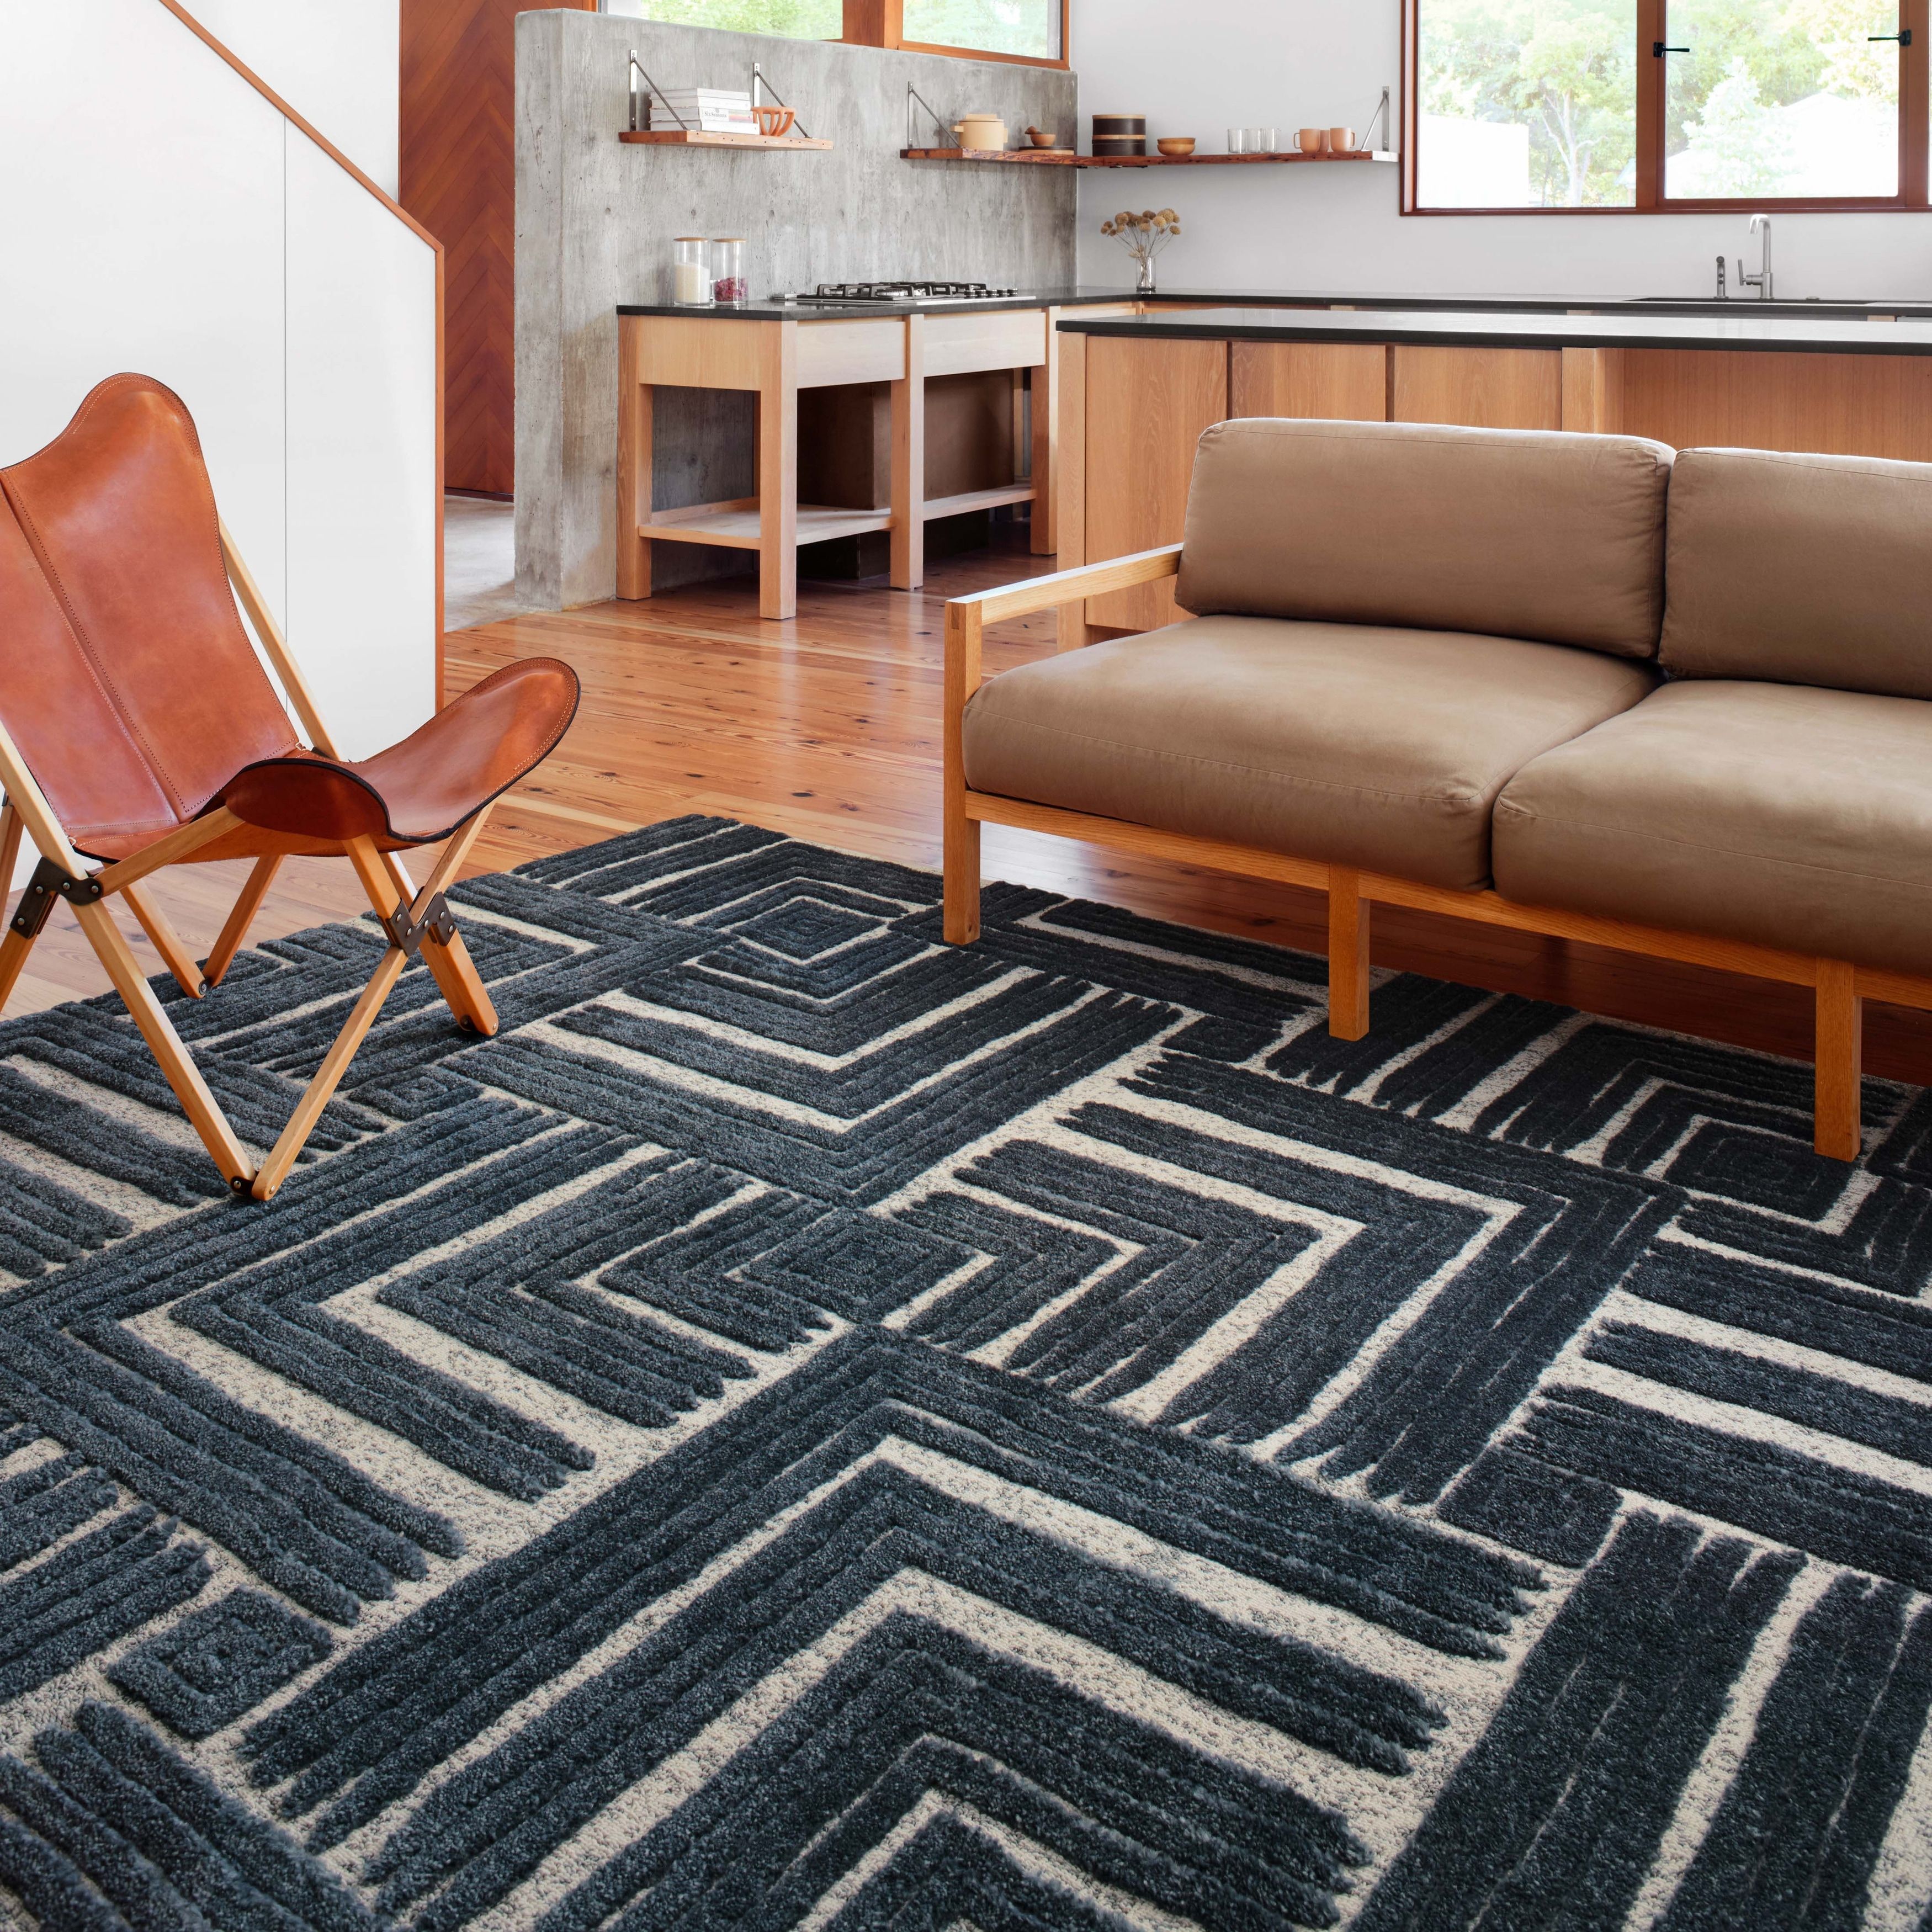 Alexander Home Vail Mid Century Modern Geometric Square Area Rug – On Sale  – Overstock – 31663956 Regarding Modern Square Rugs (View 4 of 15)